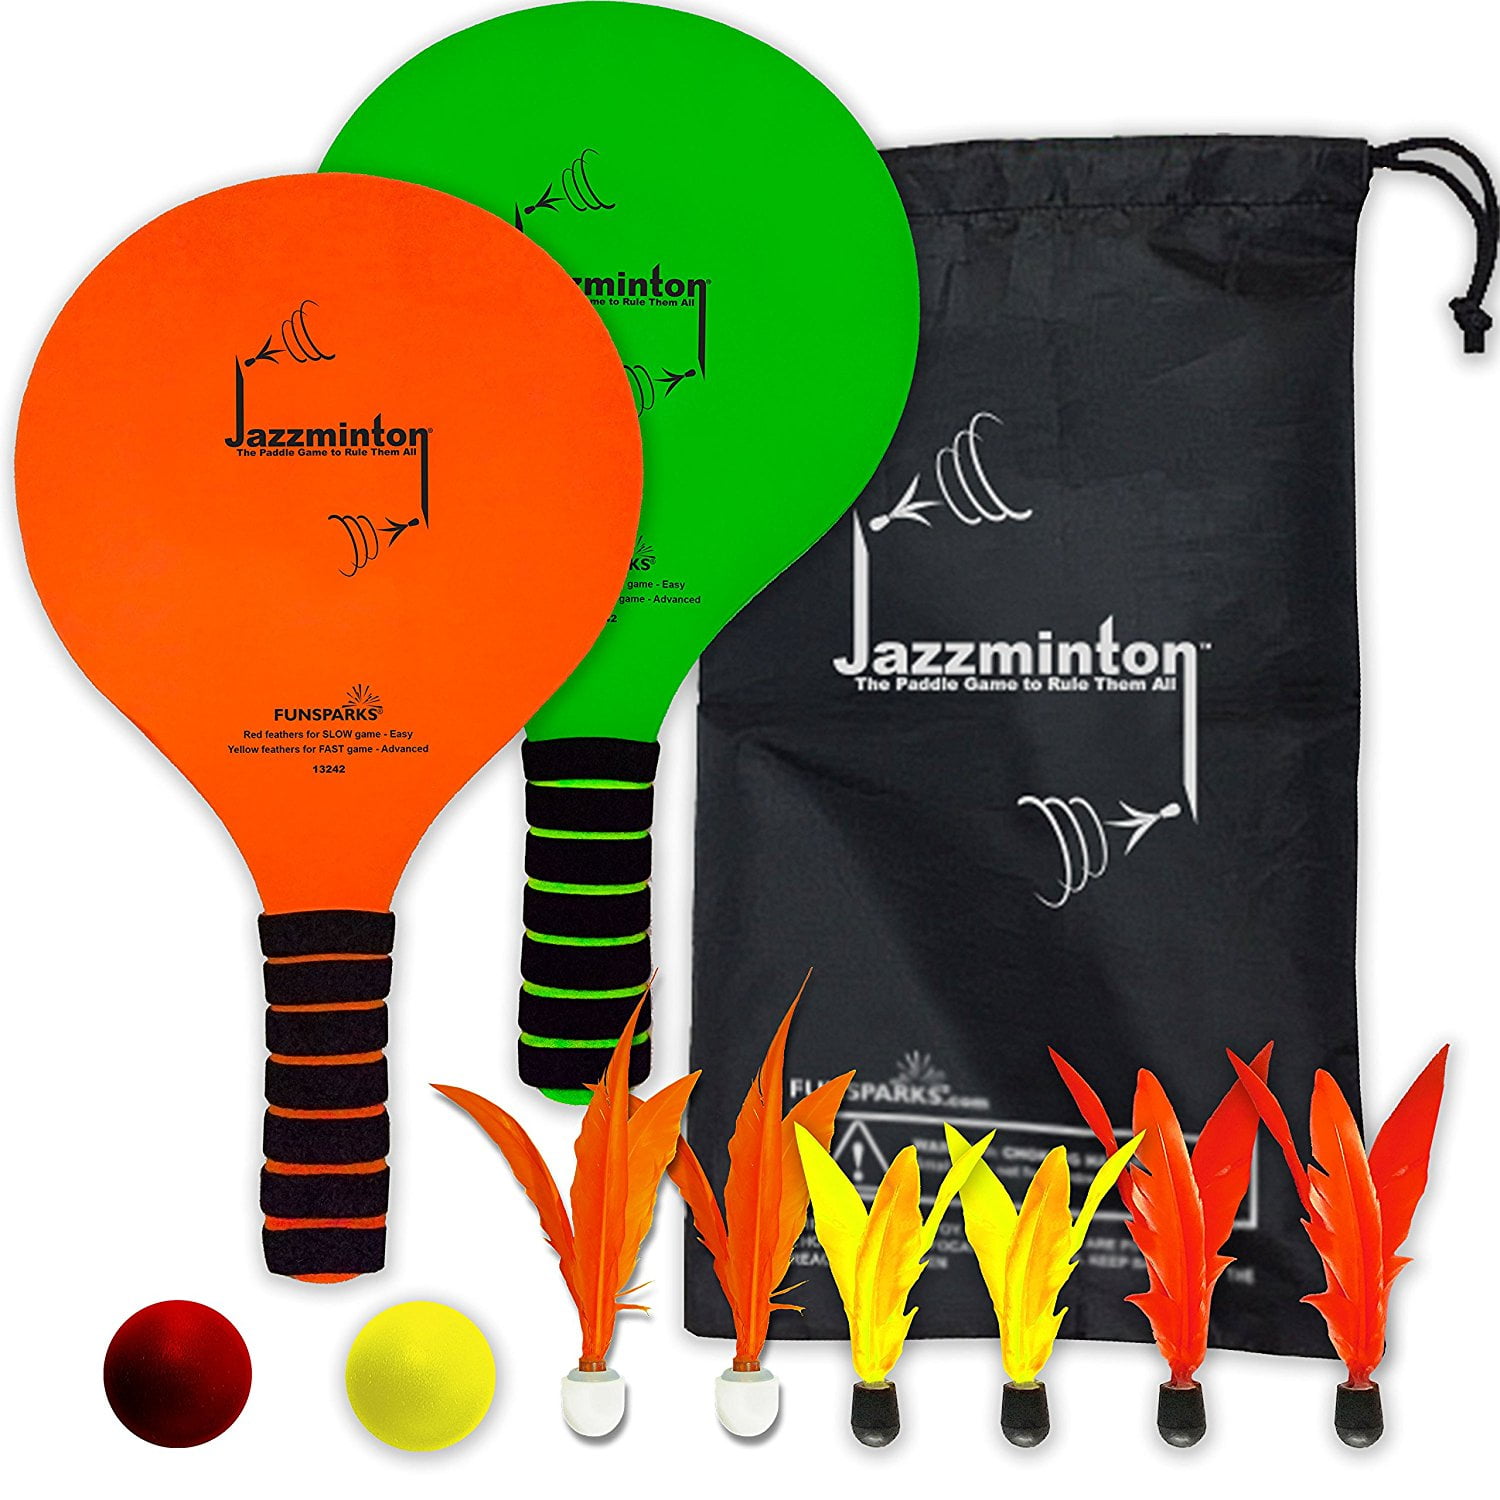 Jazzminton Deluxe LED 3 in 1 Paddle Ball Game Indoor Outdoor Kids Teens Adults for sale online